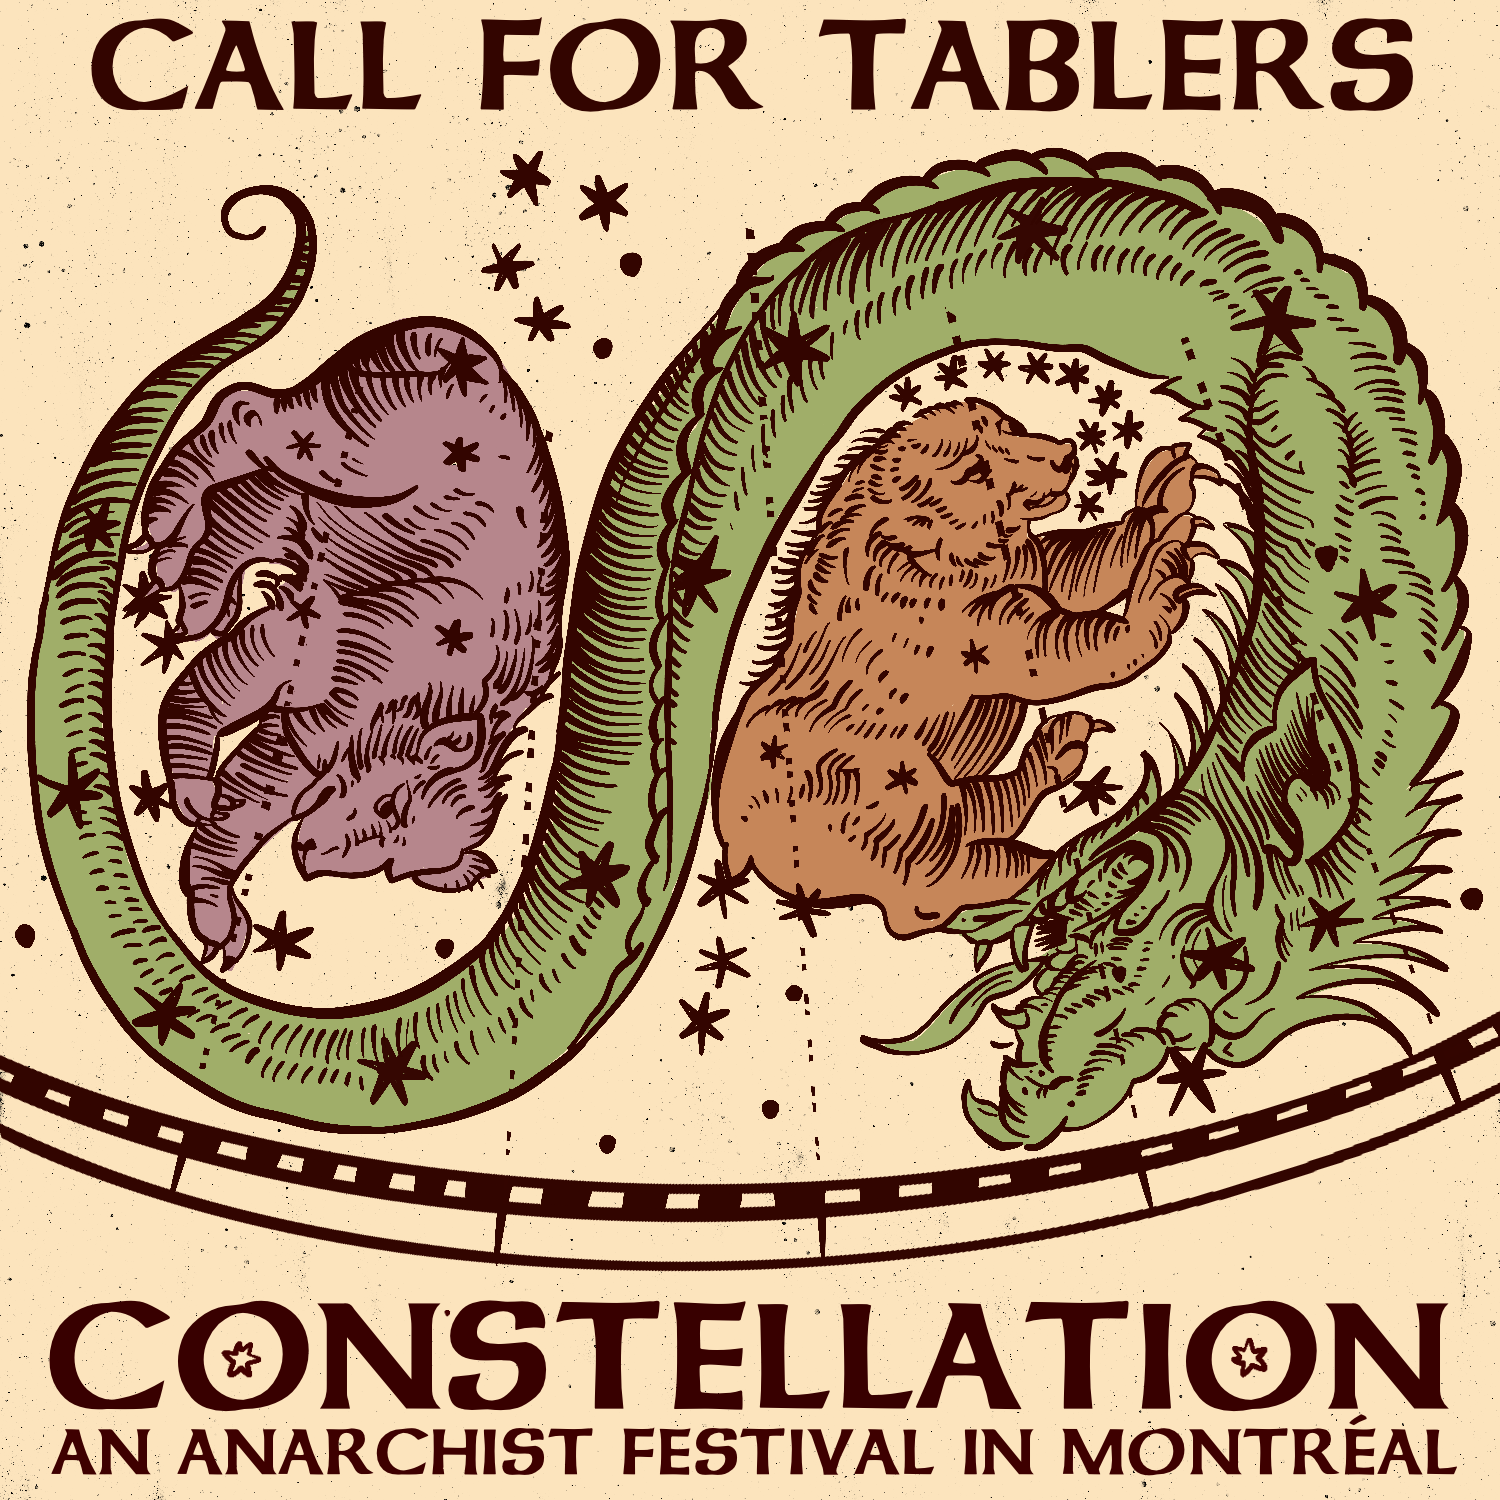 Call for Tablers - CONSTELLATION: An Anarchist Festival in Montréal